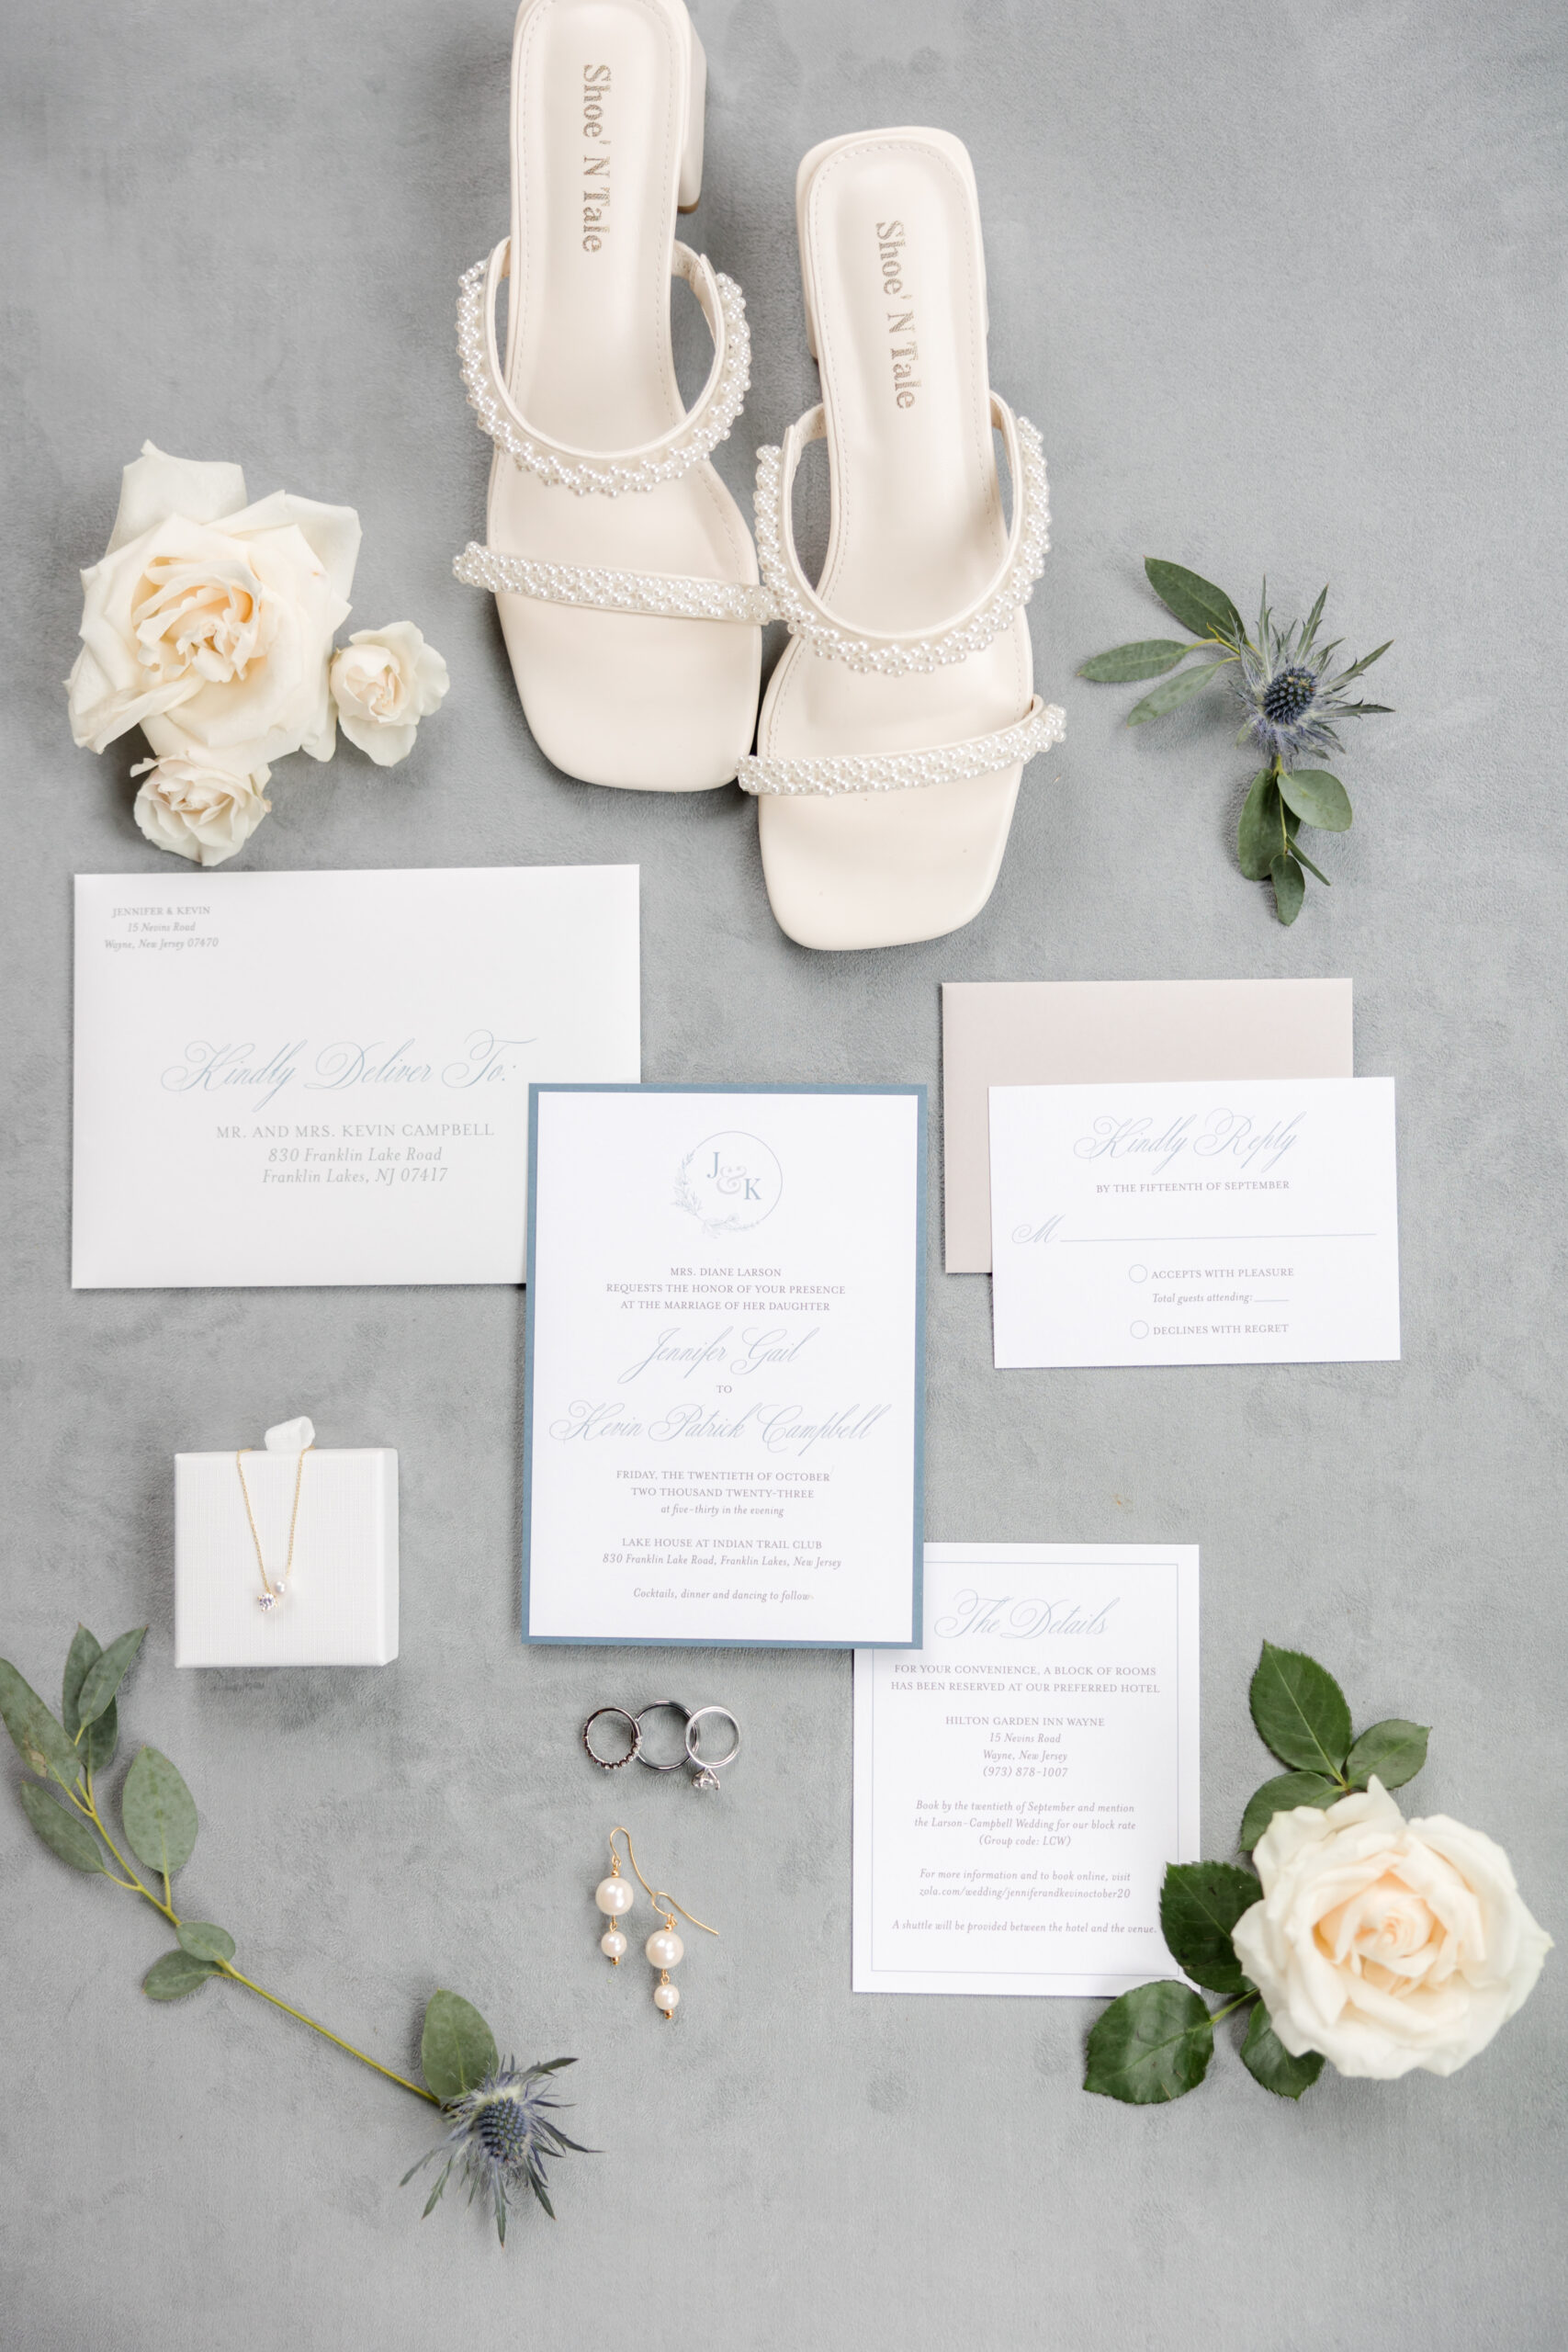 Wedding invitation with details of the bride